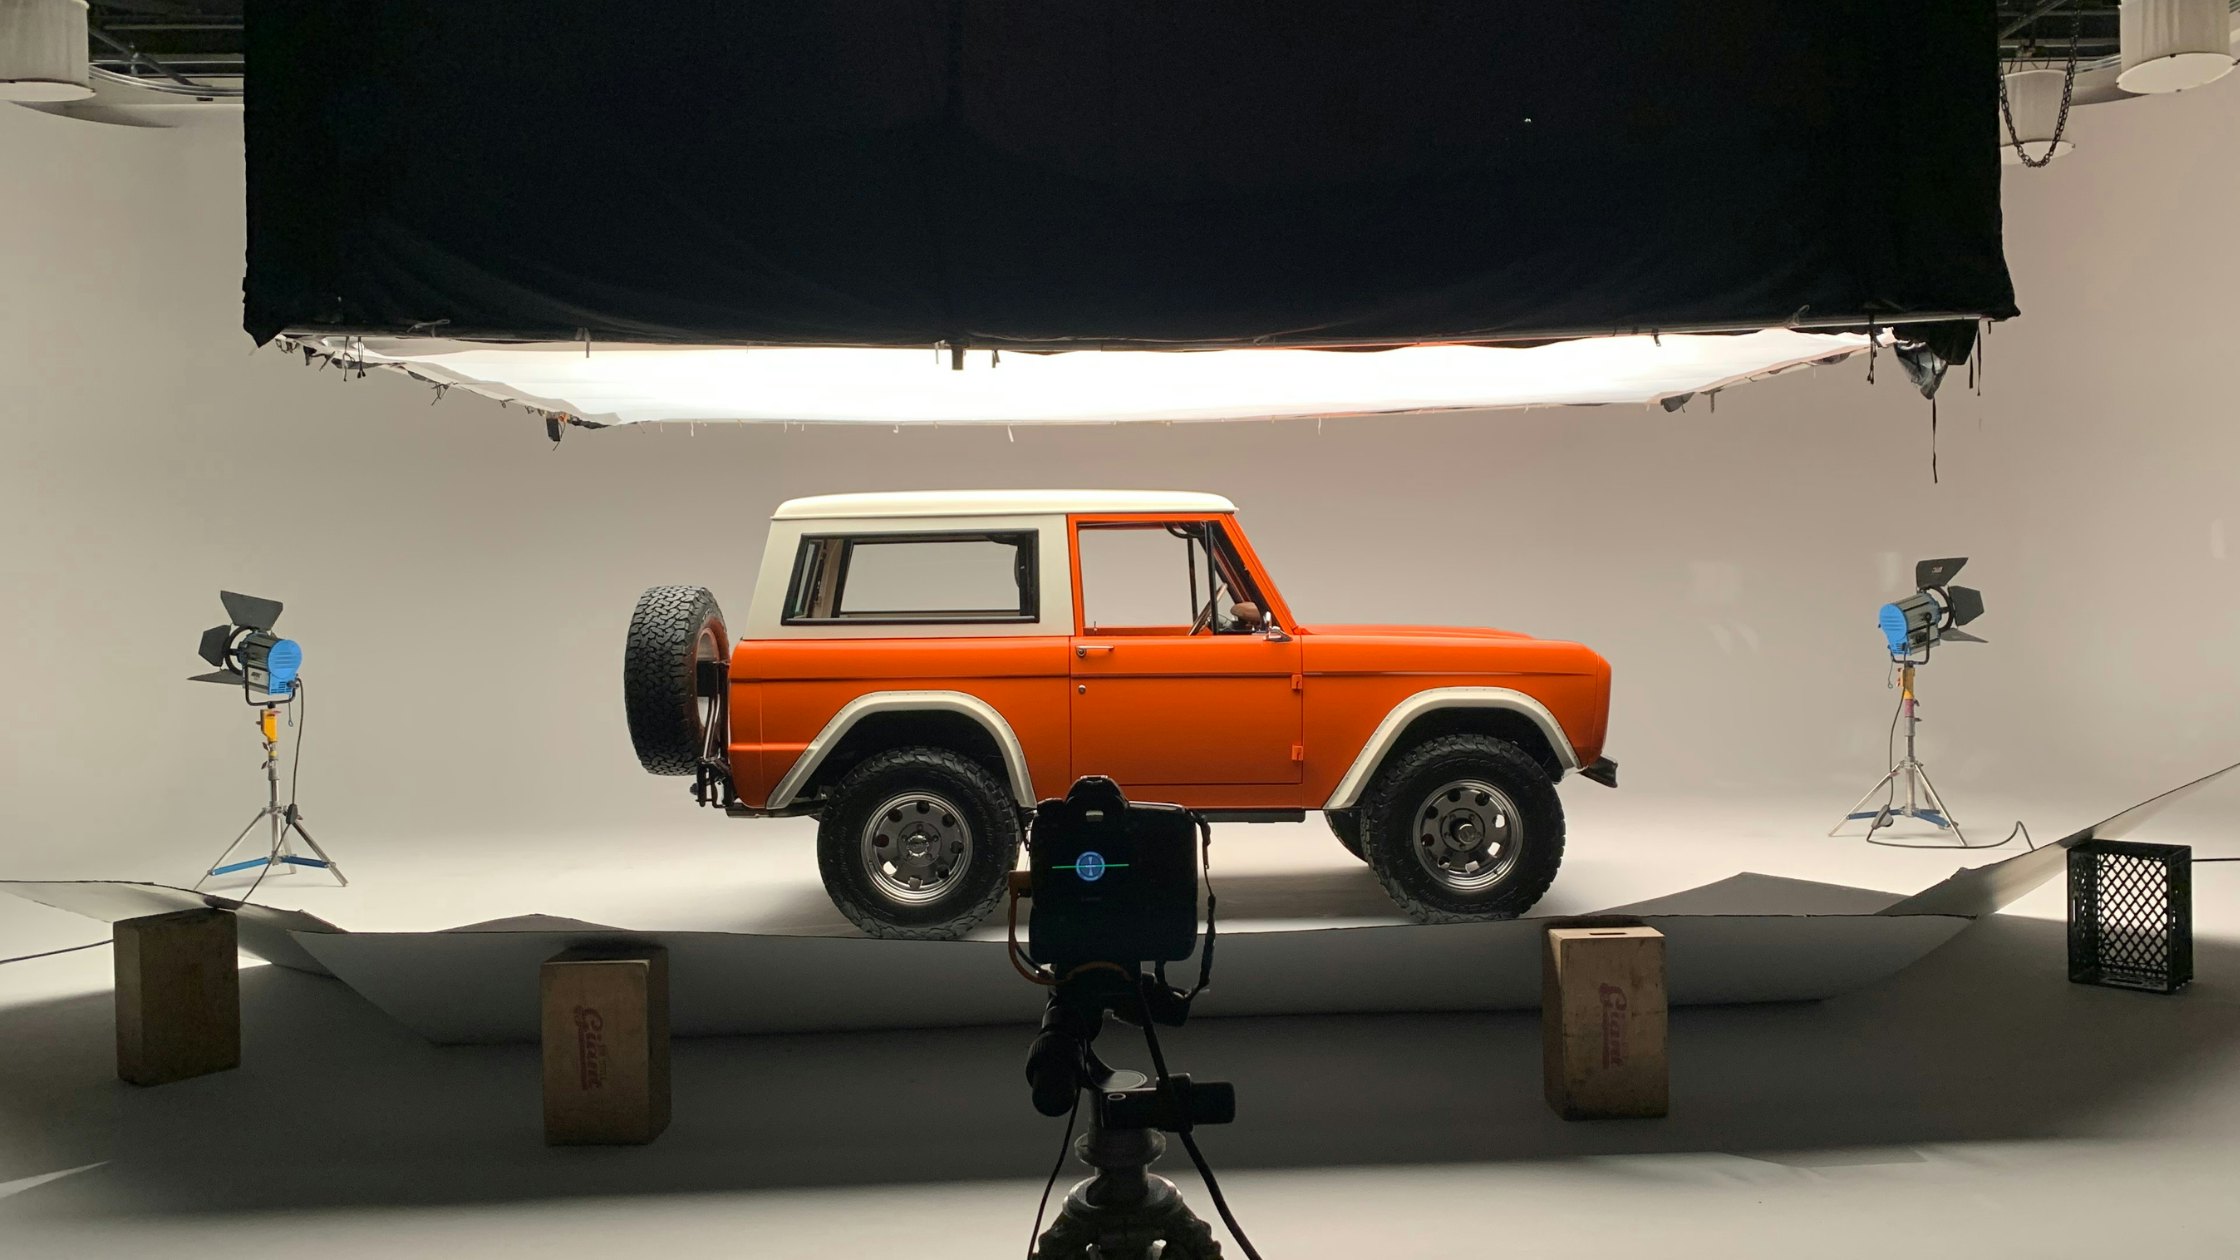 Behind the scenes of the Bronco photoshoot